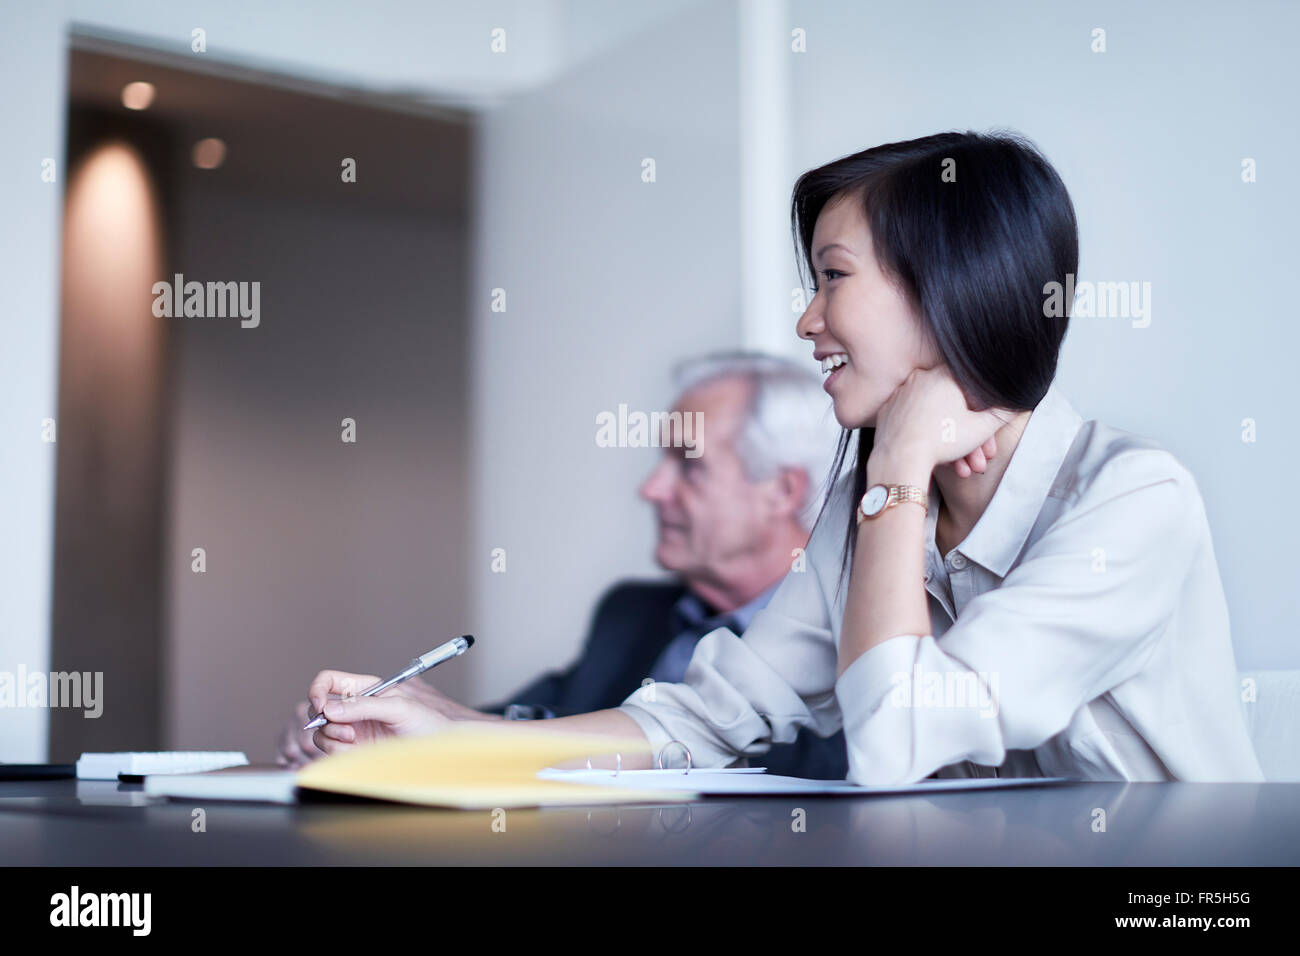 Smiling businesswoman taking notes in meeting Banque D'Images